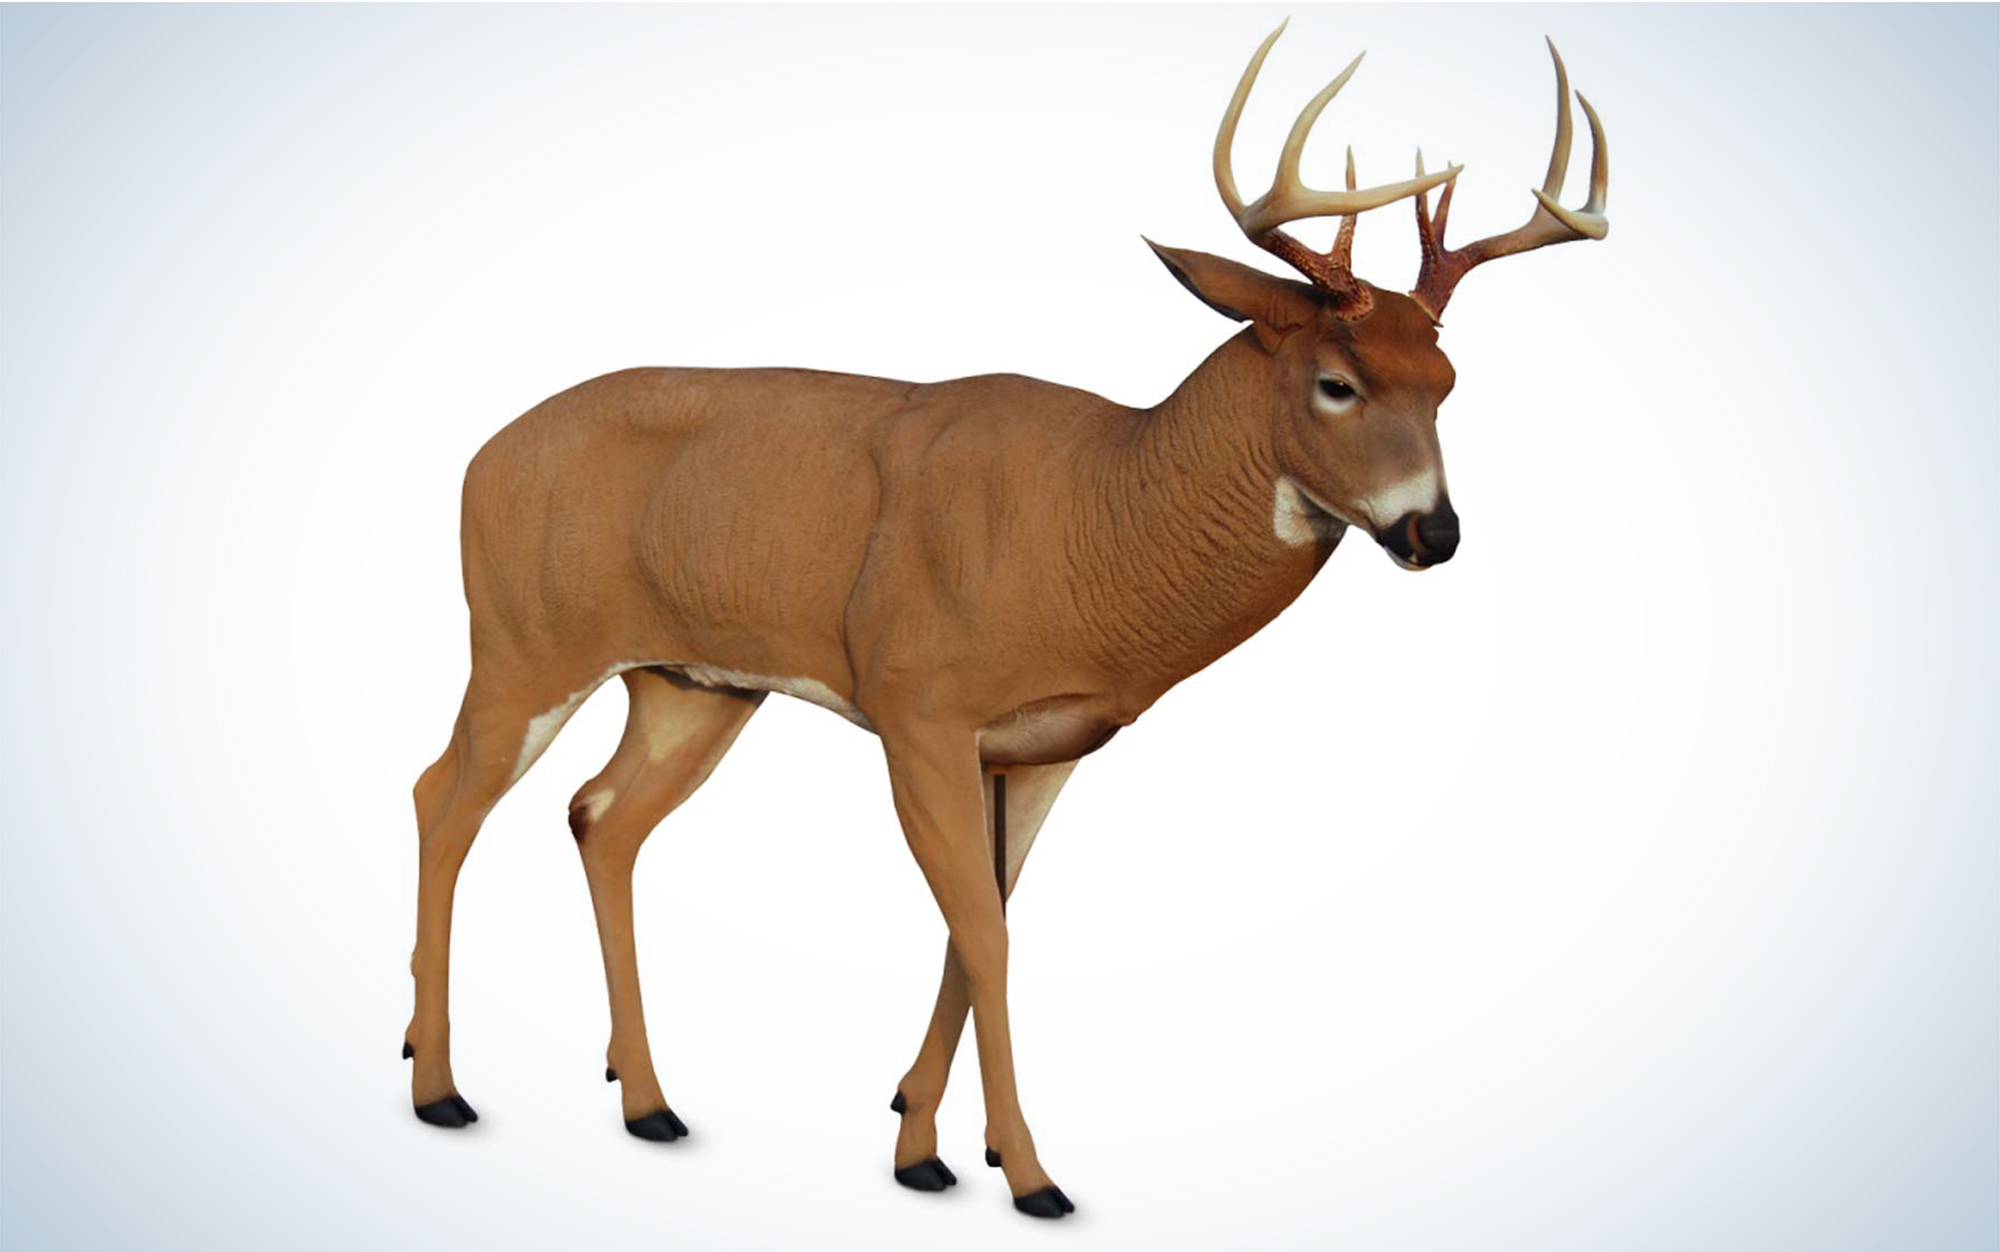 The Dave Smith Posturing Buck Decoy is the most realistic.